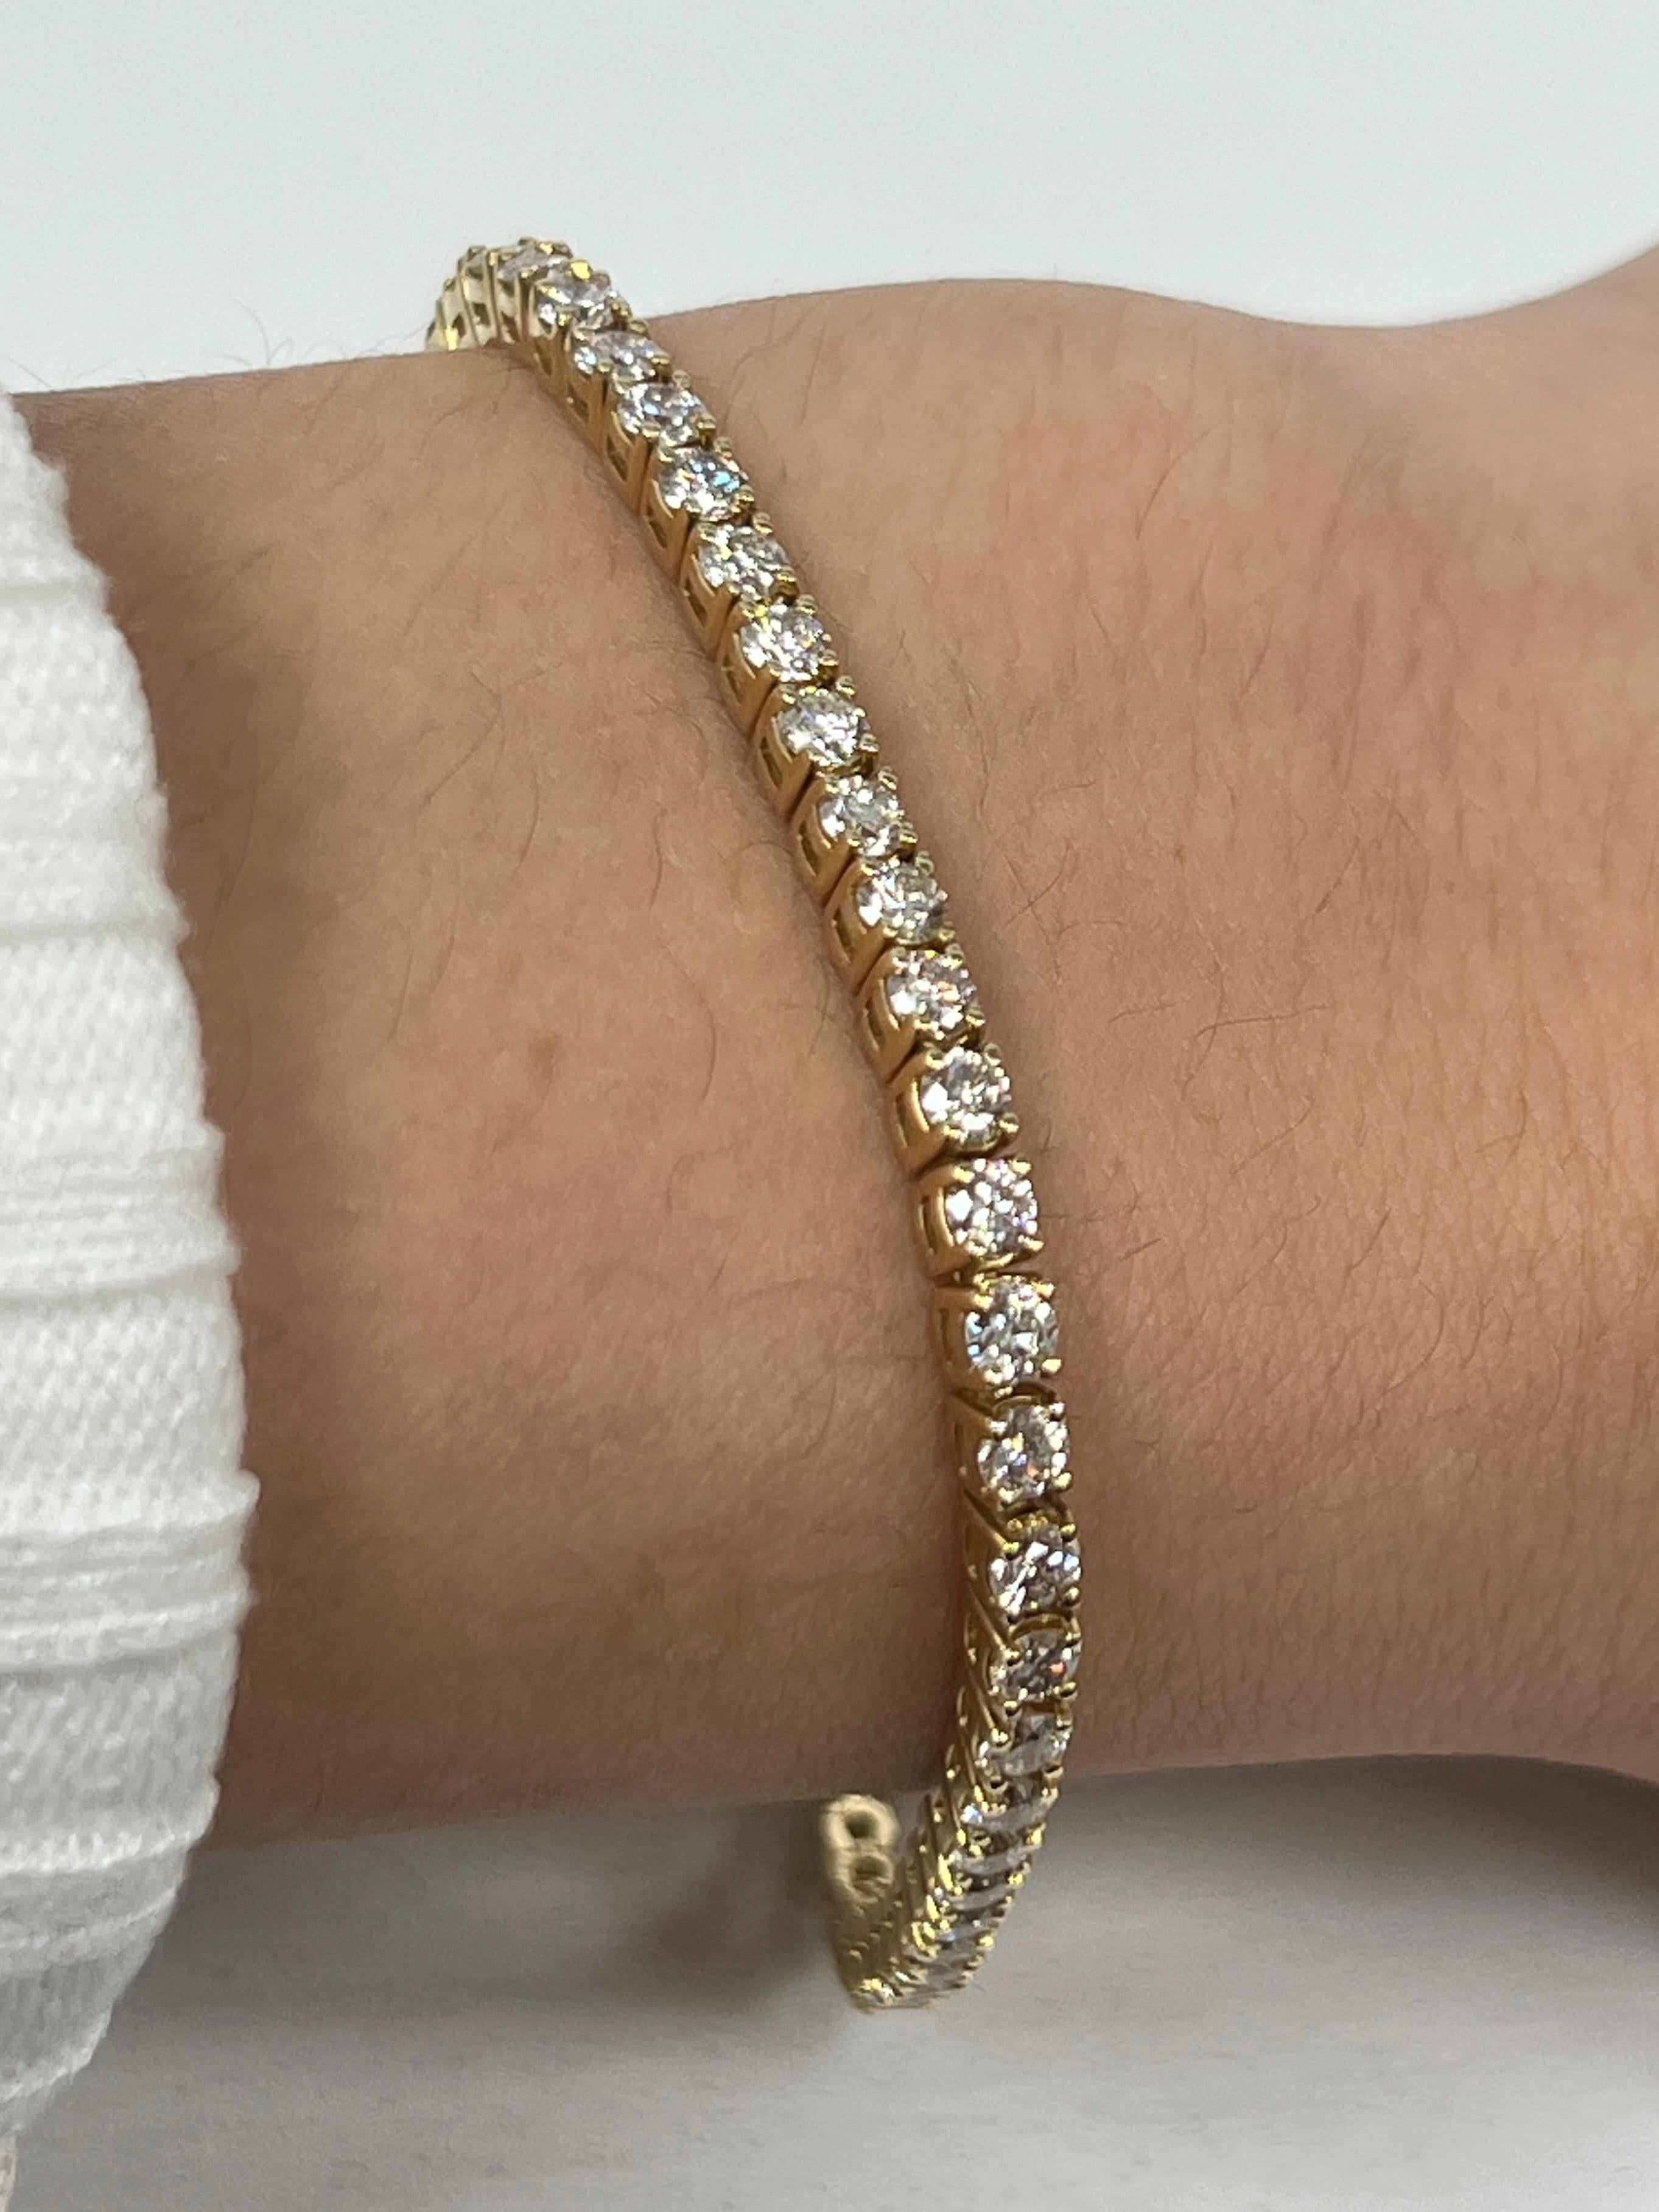 Fashion and glam are at the forefront with this exquisite diamond bracelet. This 14-karat yellow gold diamond bracelet is made from 10.6 grams of gold. The top is adorned with one row of I-J color, VS/SI clarity diamonds. This bracelet carries 59